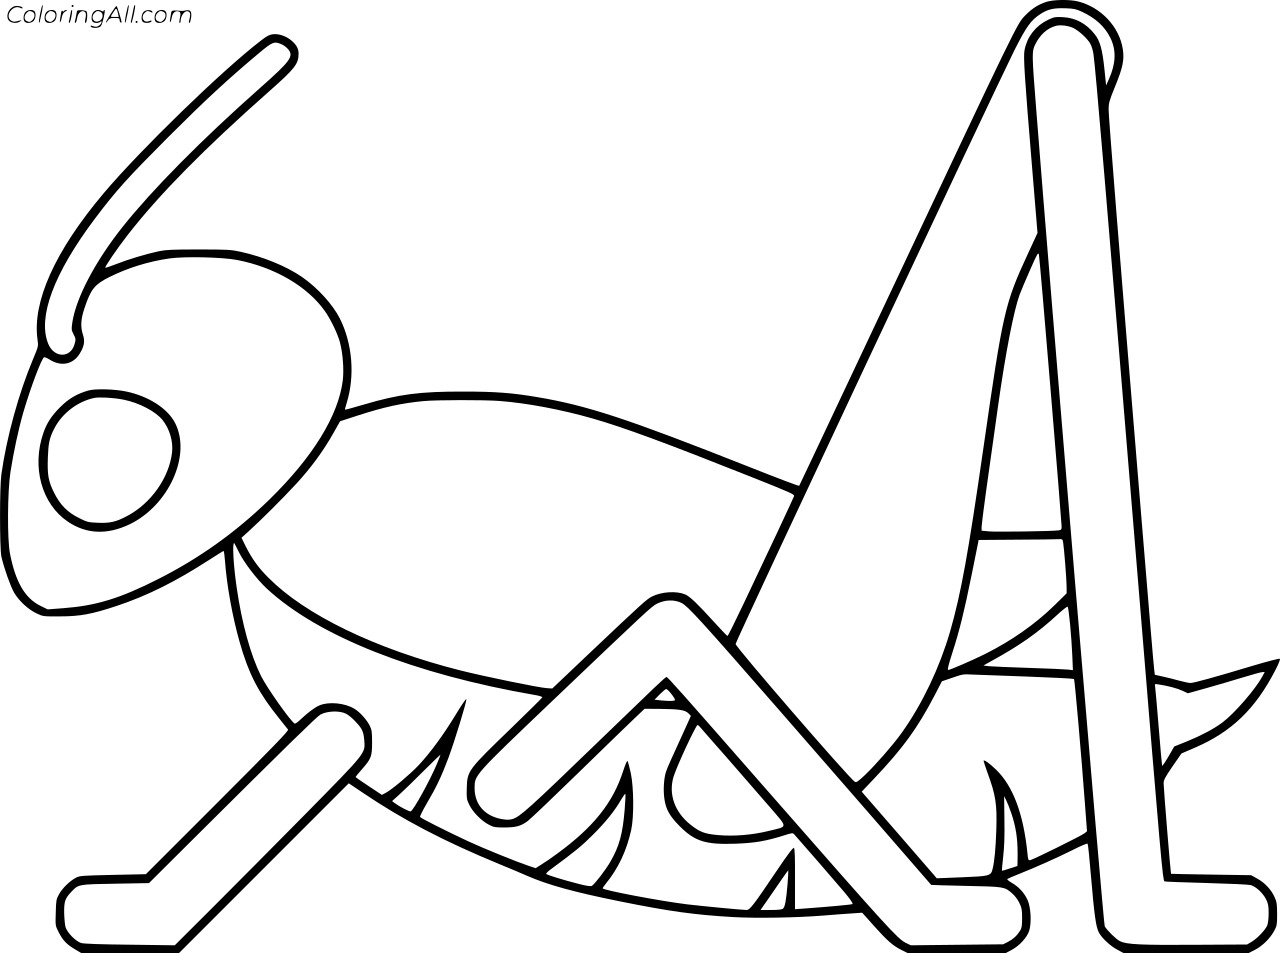 Blank Grasshopper Free Coloring Page